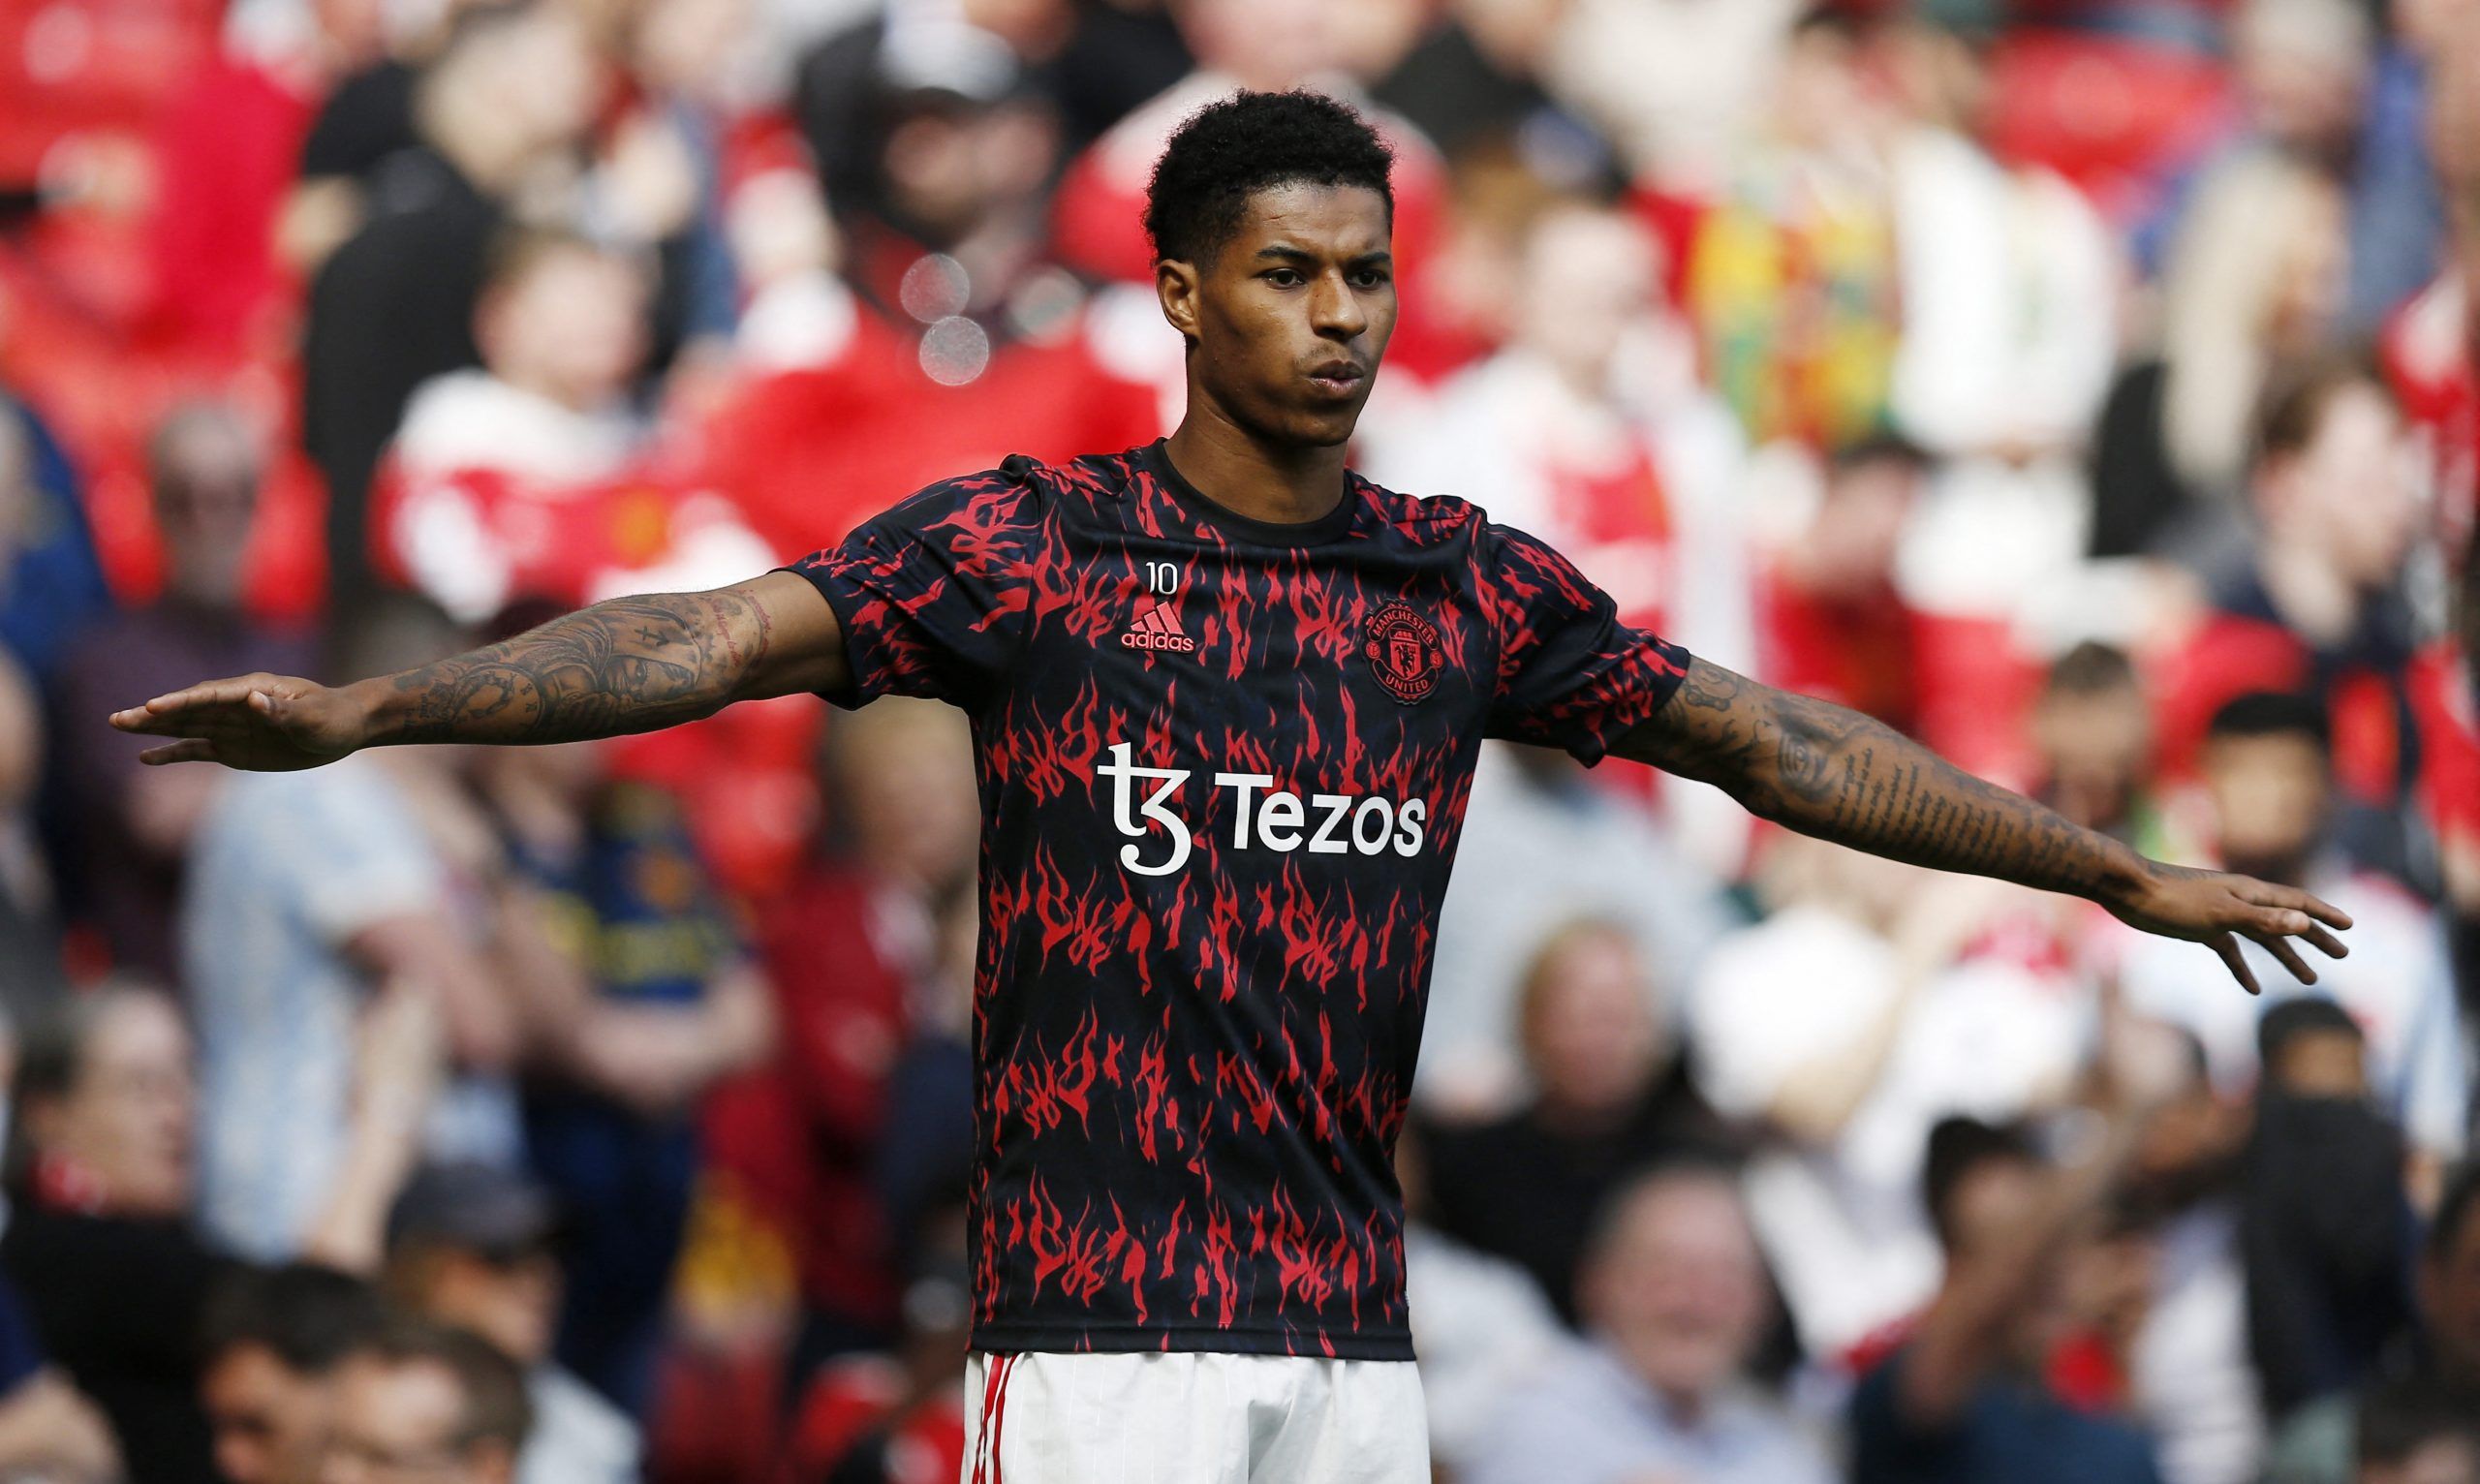 Premier League, Manchester United, MUFC, Marcus Rashford, Performance In Numbers, MUFC analysis, Manchester United vs Arsenal, MUFC team news, MUFC chalkboard